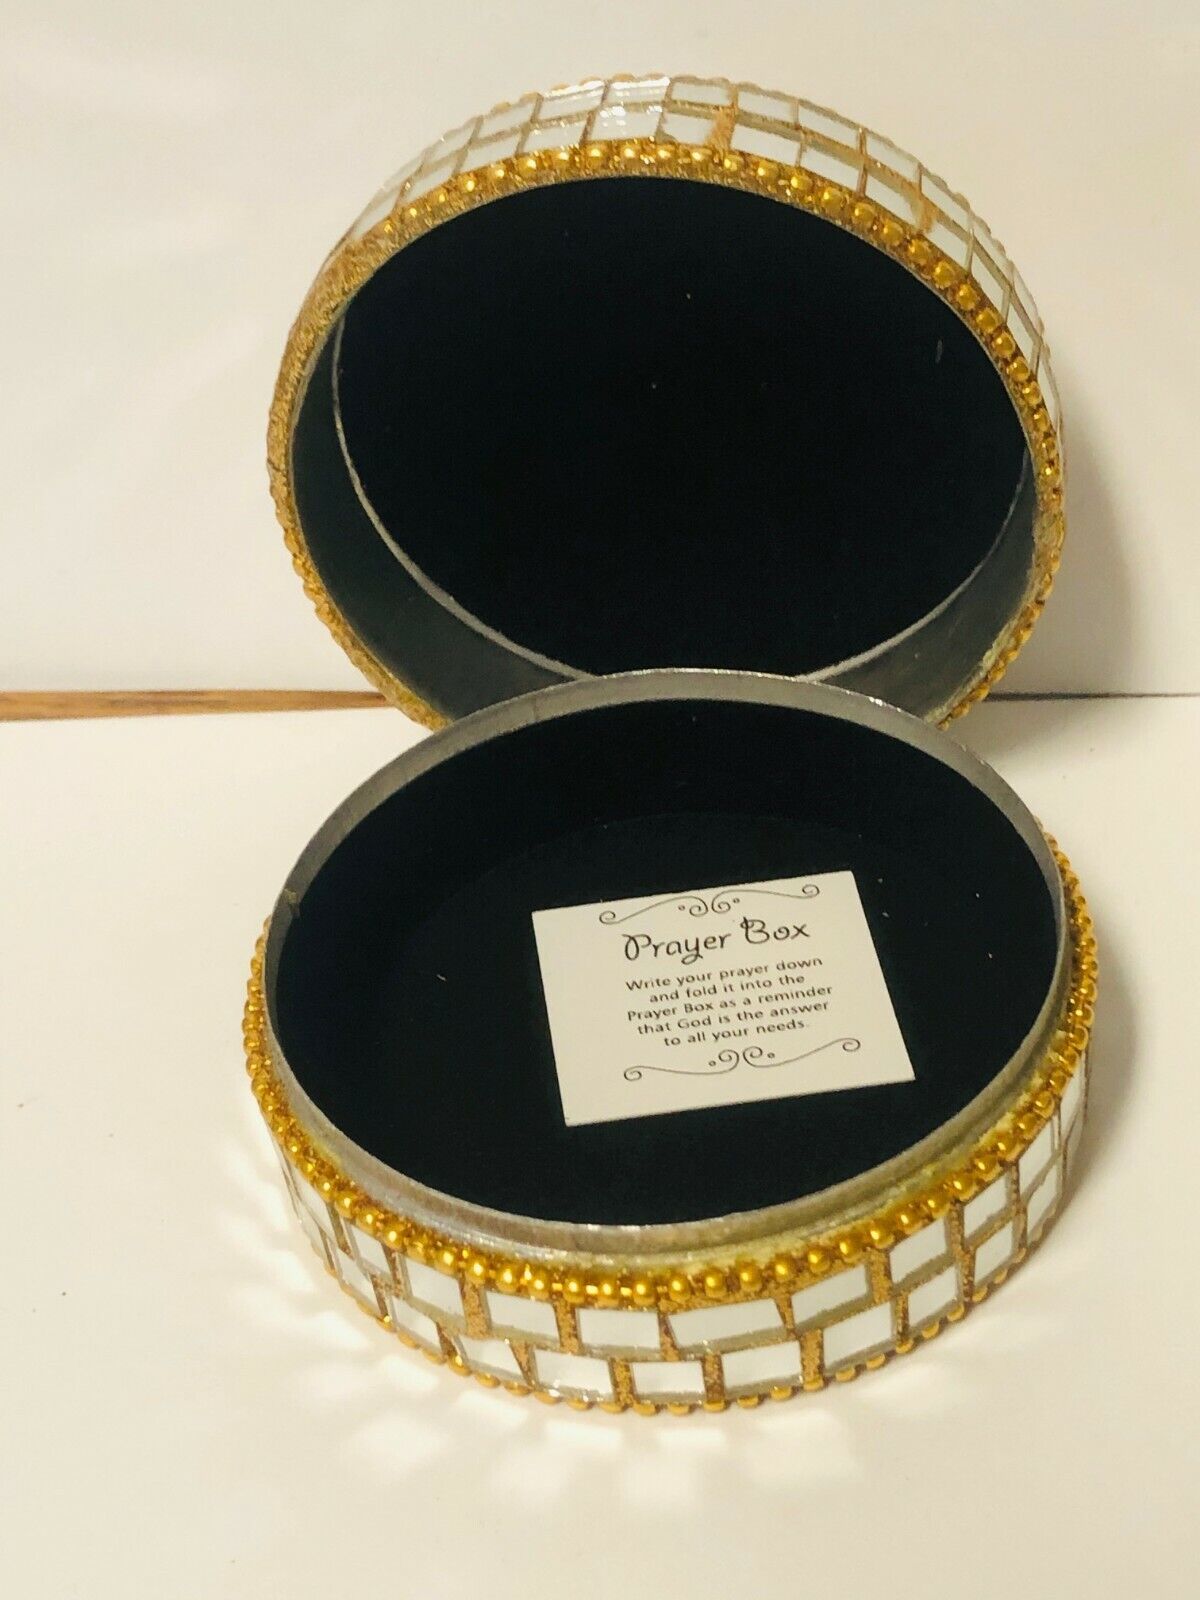 Prayer Box, Decorative Mirror/Gold Sequins Round Box, 3" New - Bob and Penny Lord